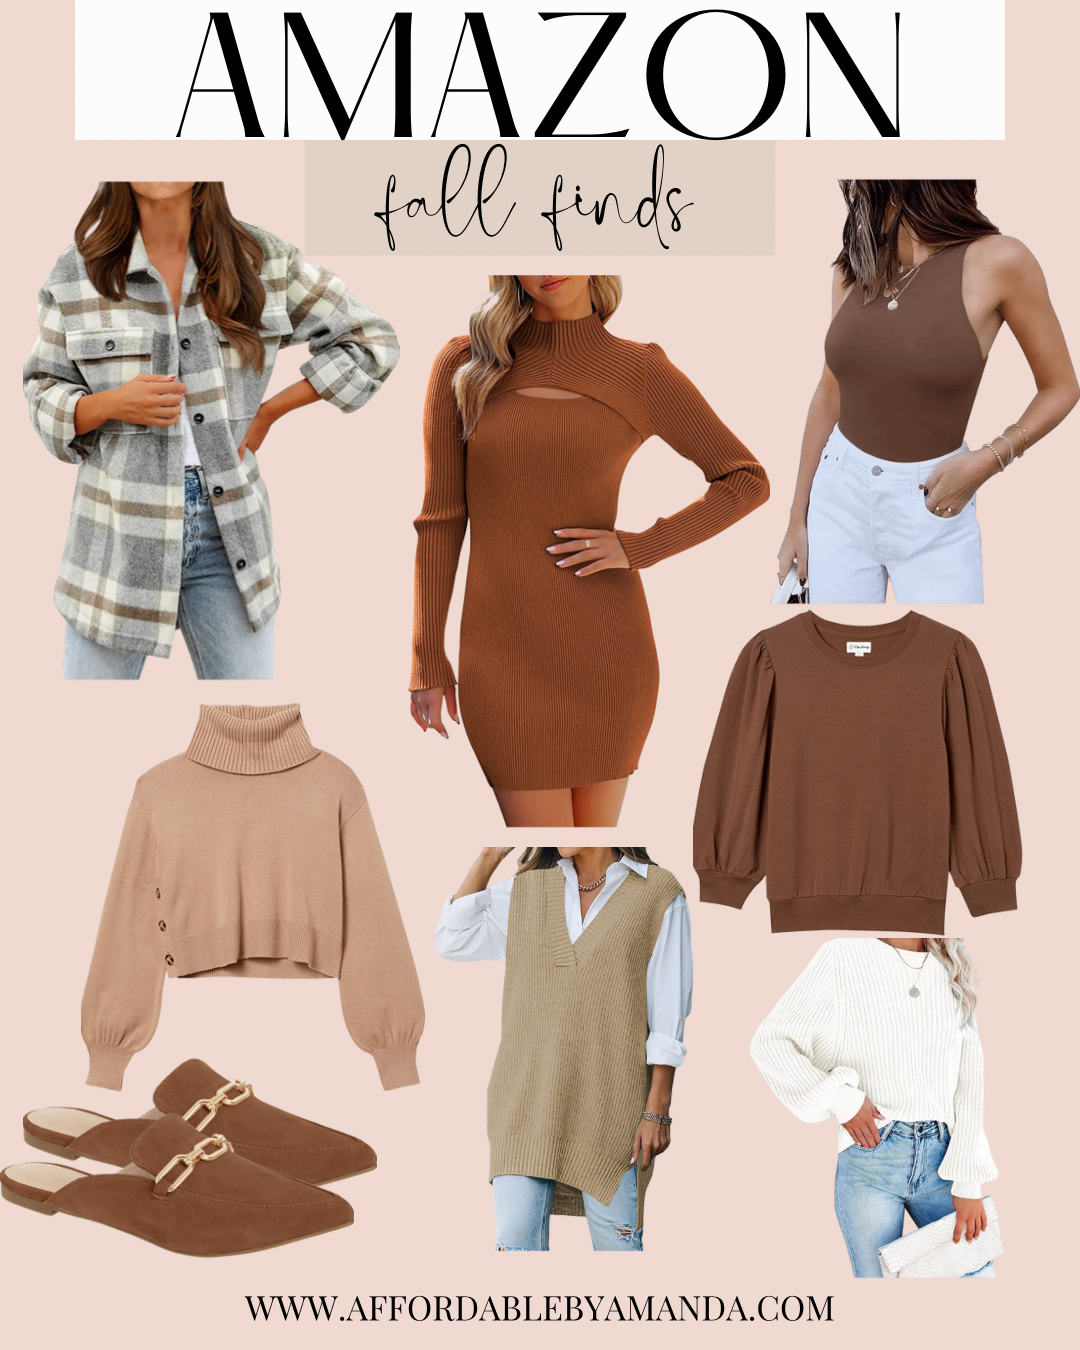 Best Amazon Fall Fashion Clothing to Shop 2022 | Affordable Fall Fashion Finds from Amazon | Cute Fall Outfits 2022